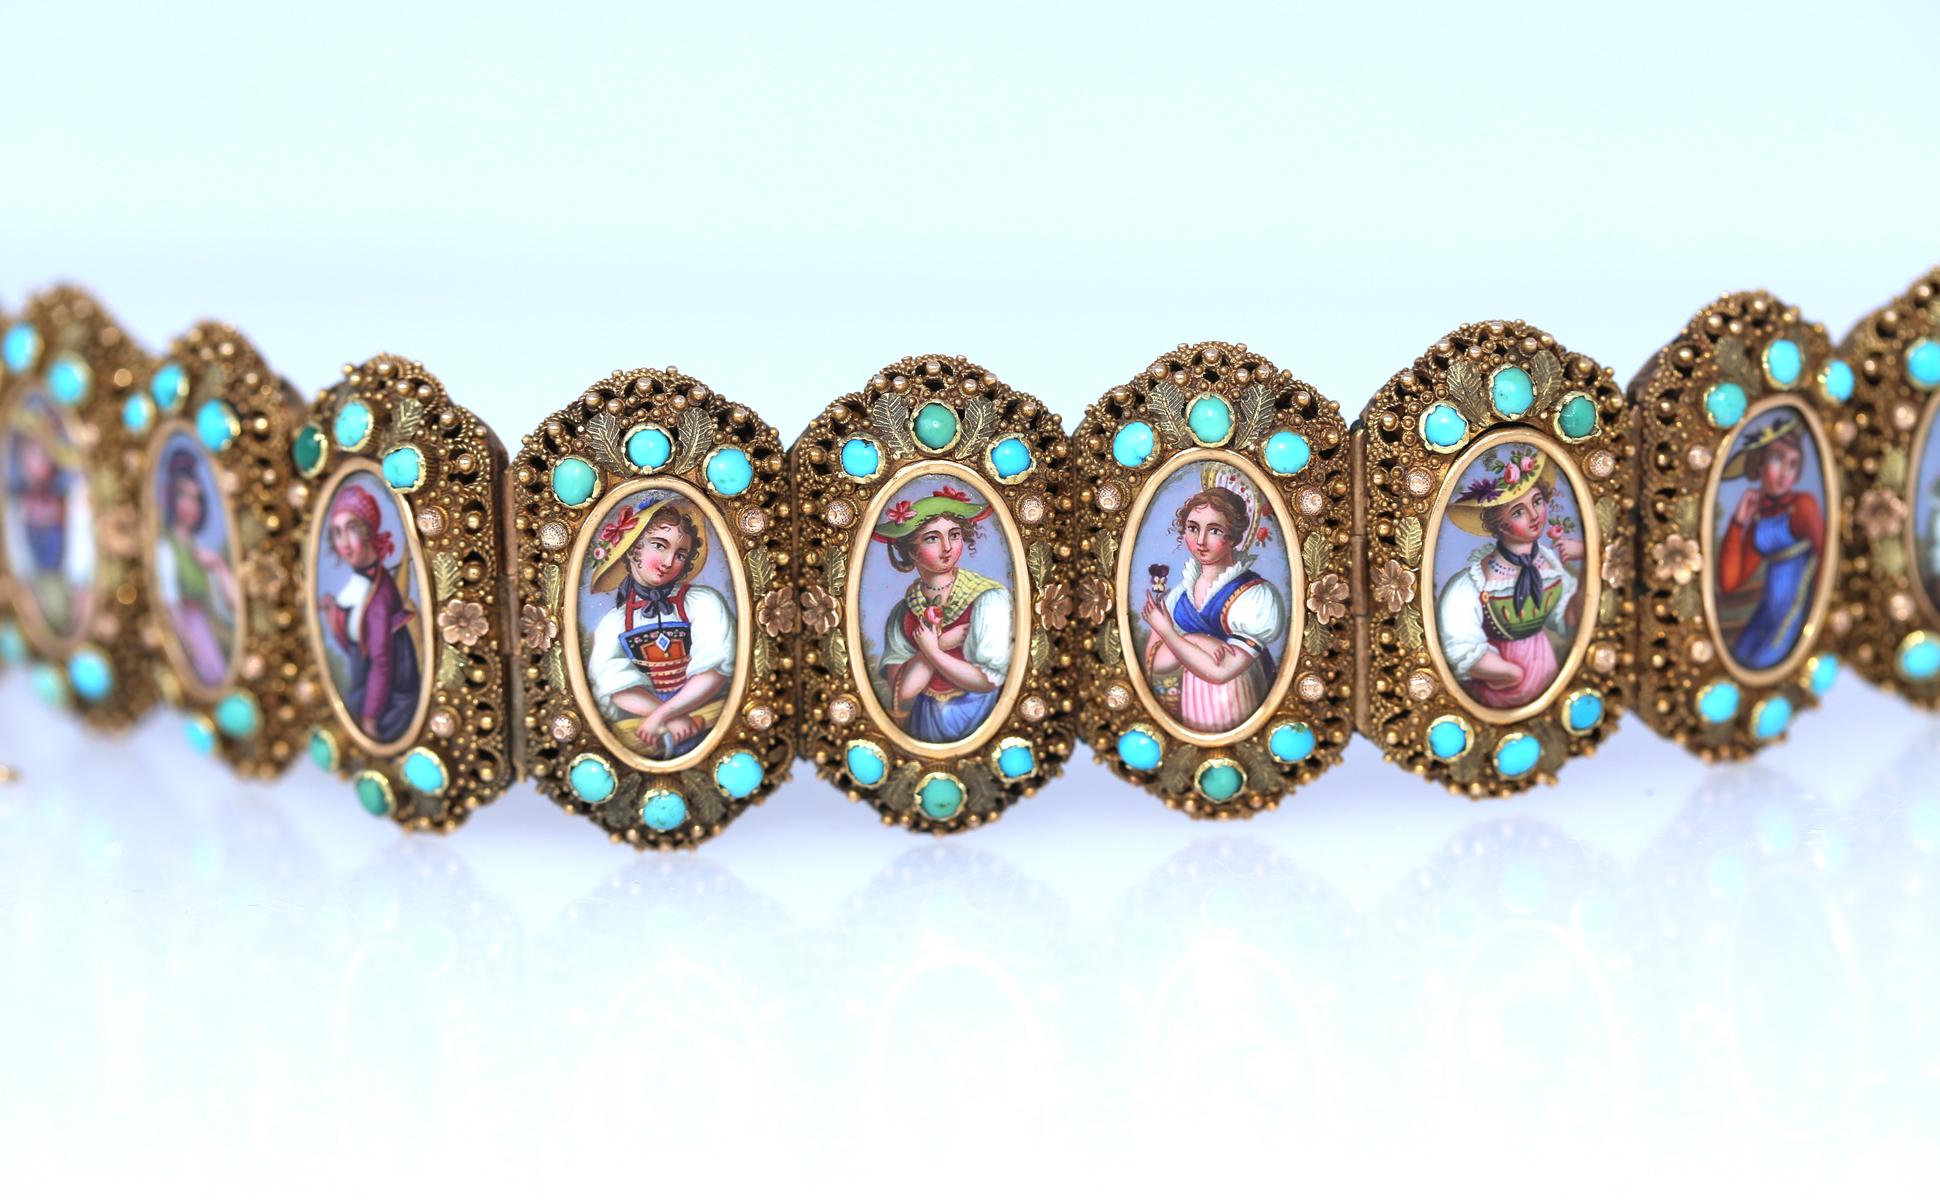  Locket Gold Bracelet Swiss Cantons Hand-Painted Ladies Turquoise, 1860 5